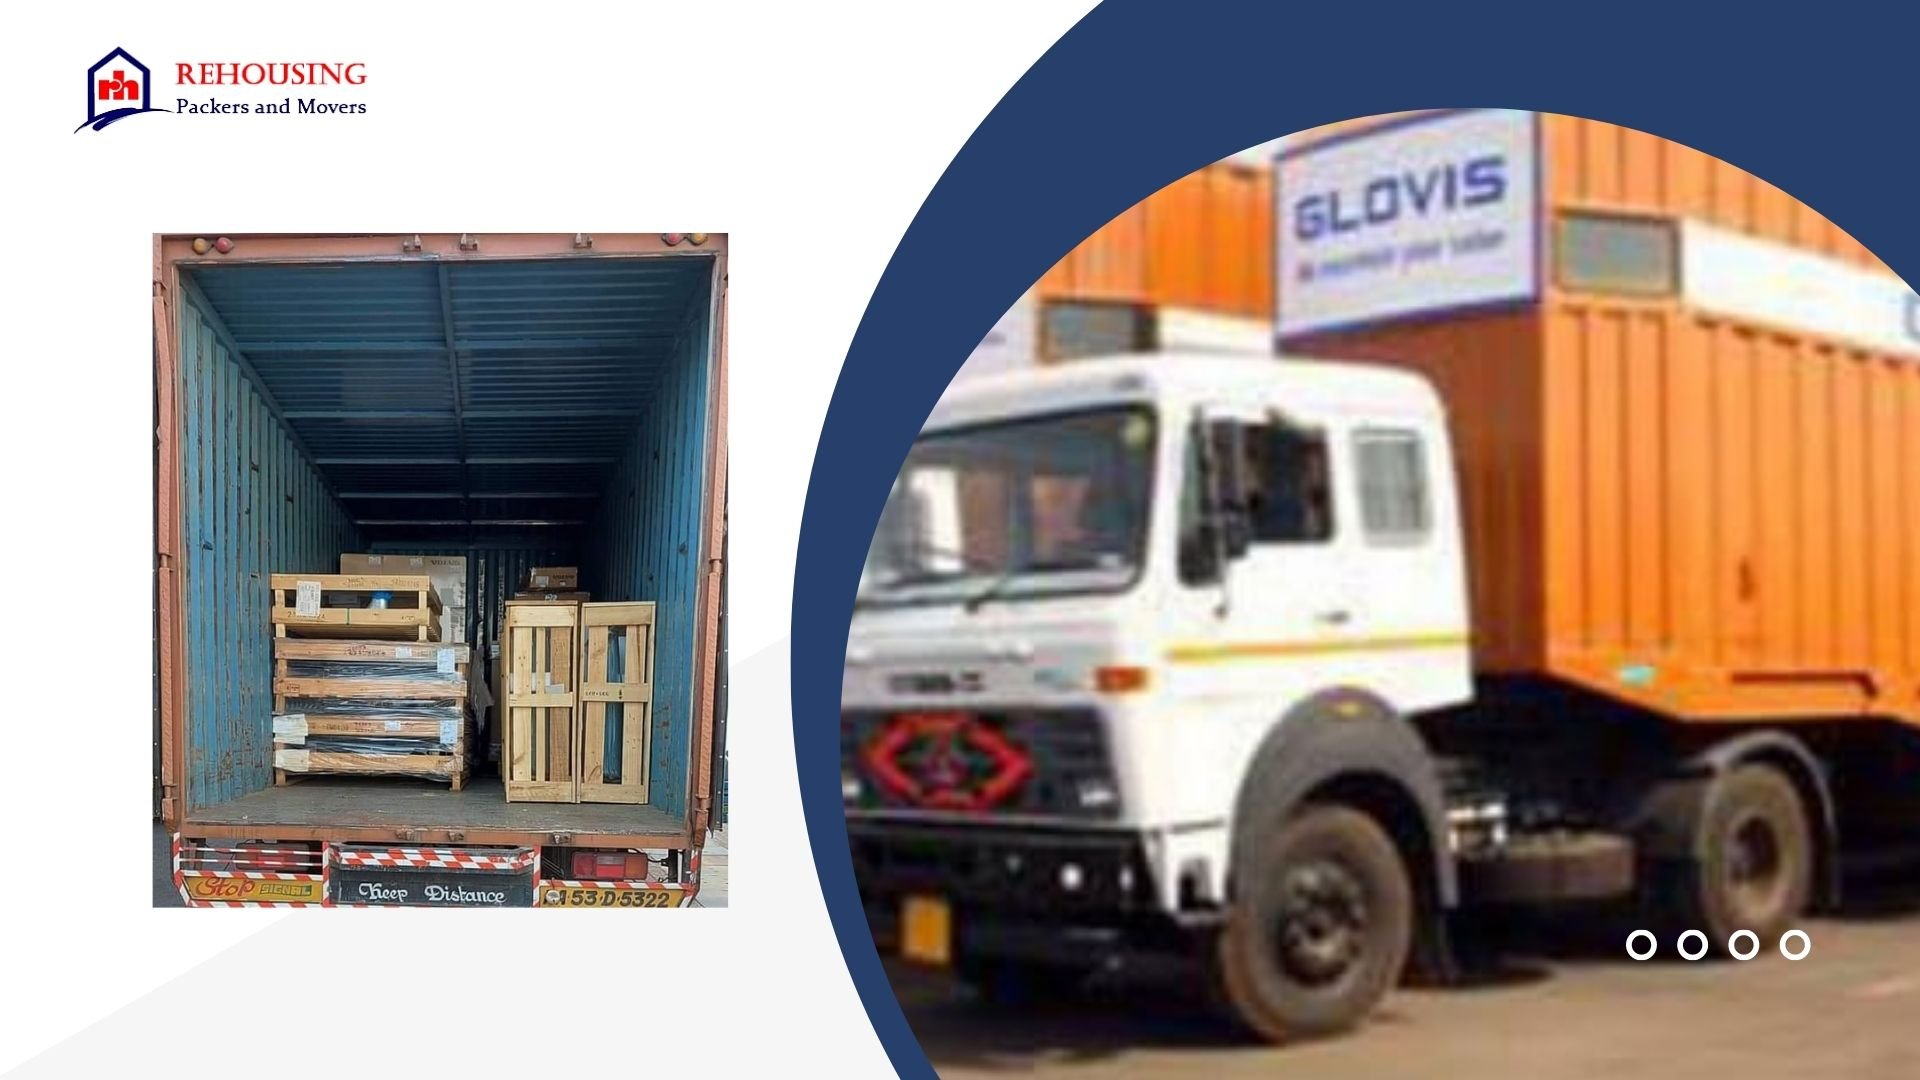 Packers and Movers From Dehradun to Ahmedabad | Rehousing packers and movers